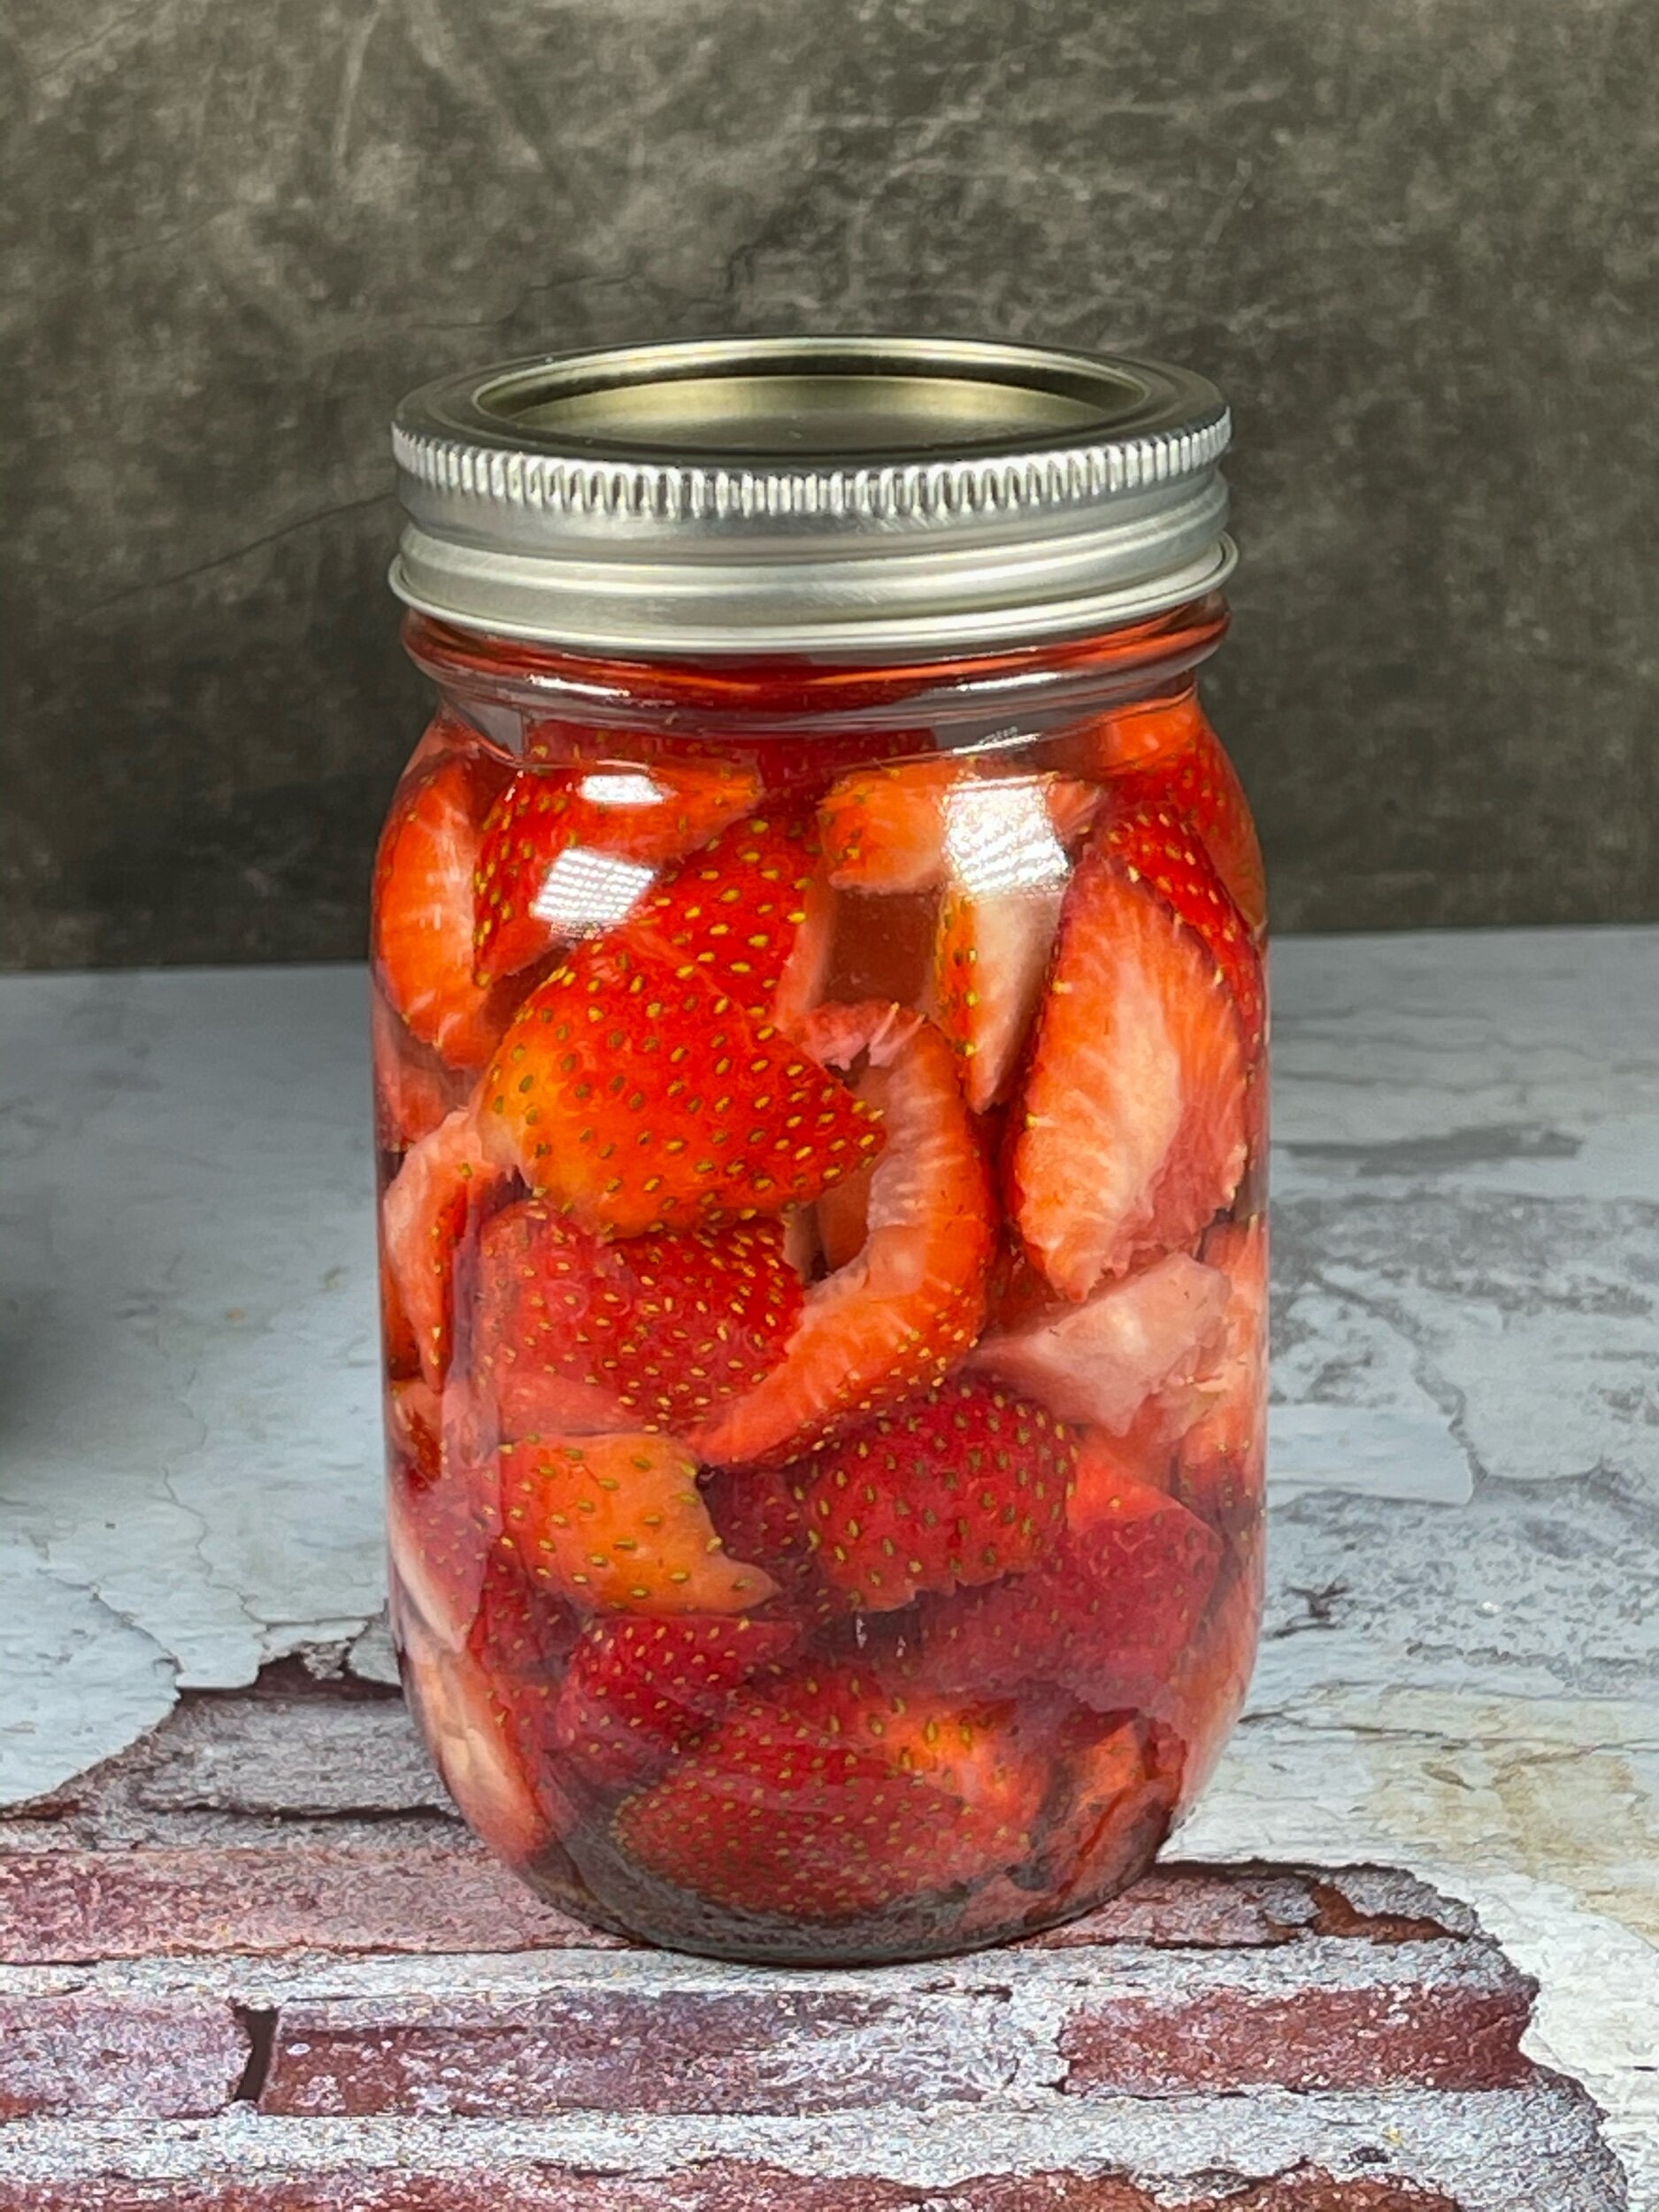  Red strawberries back in their jar with vodka filling it up and making sure all fruit is submerged. 